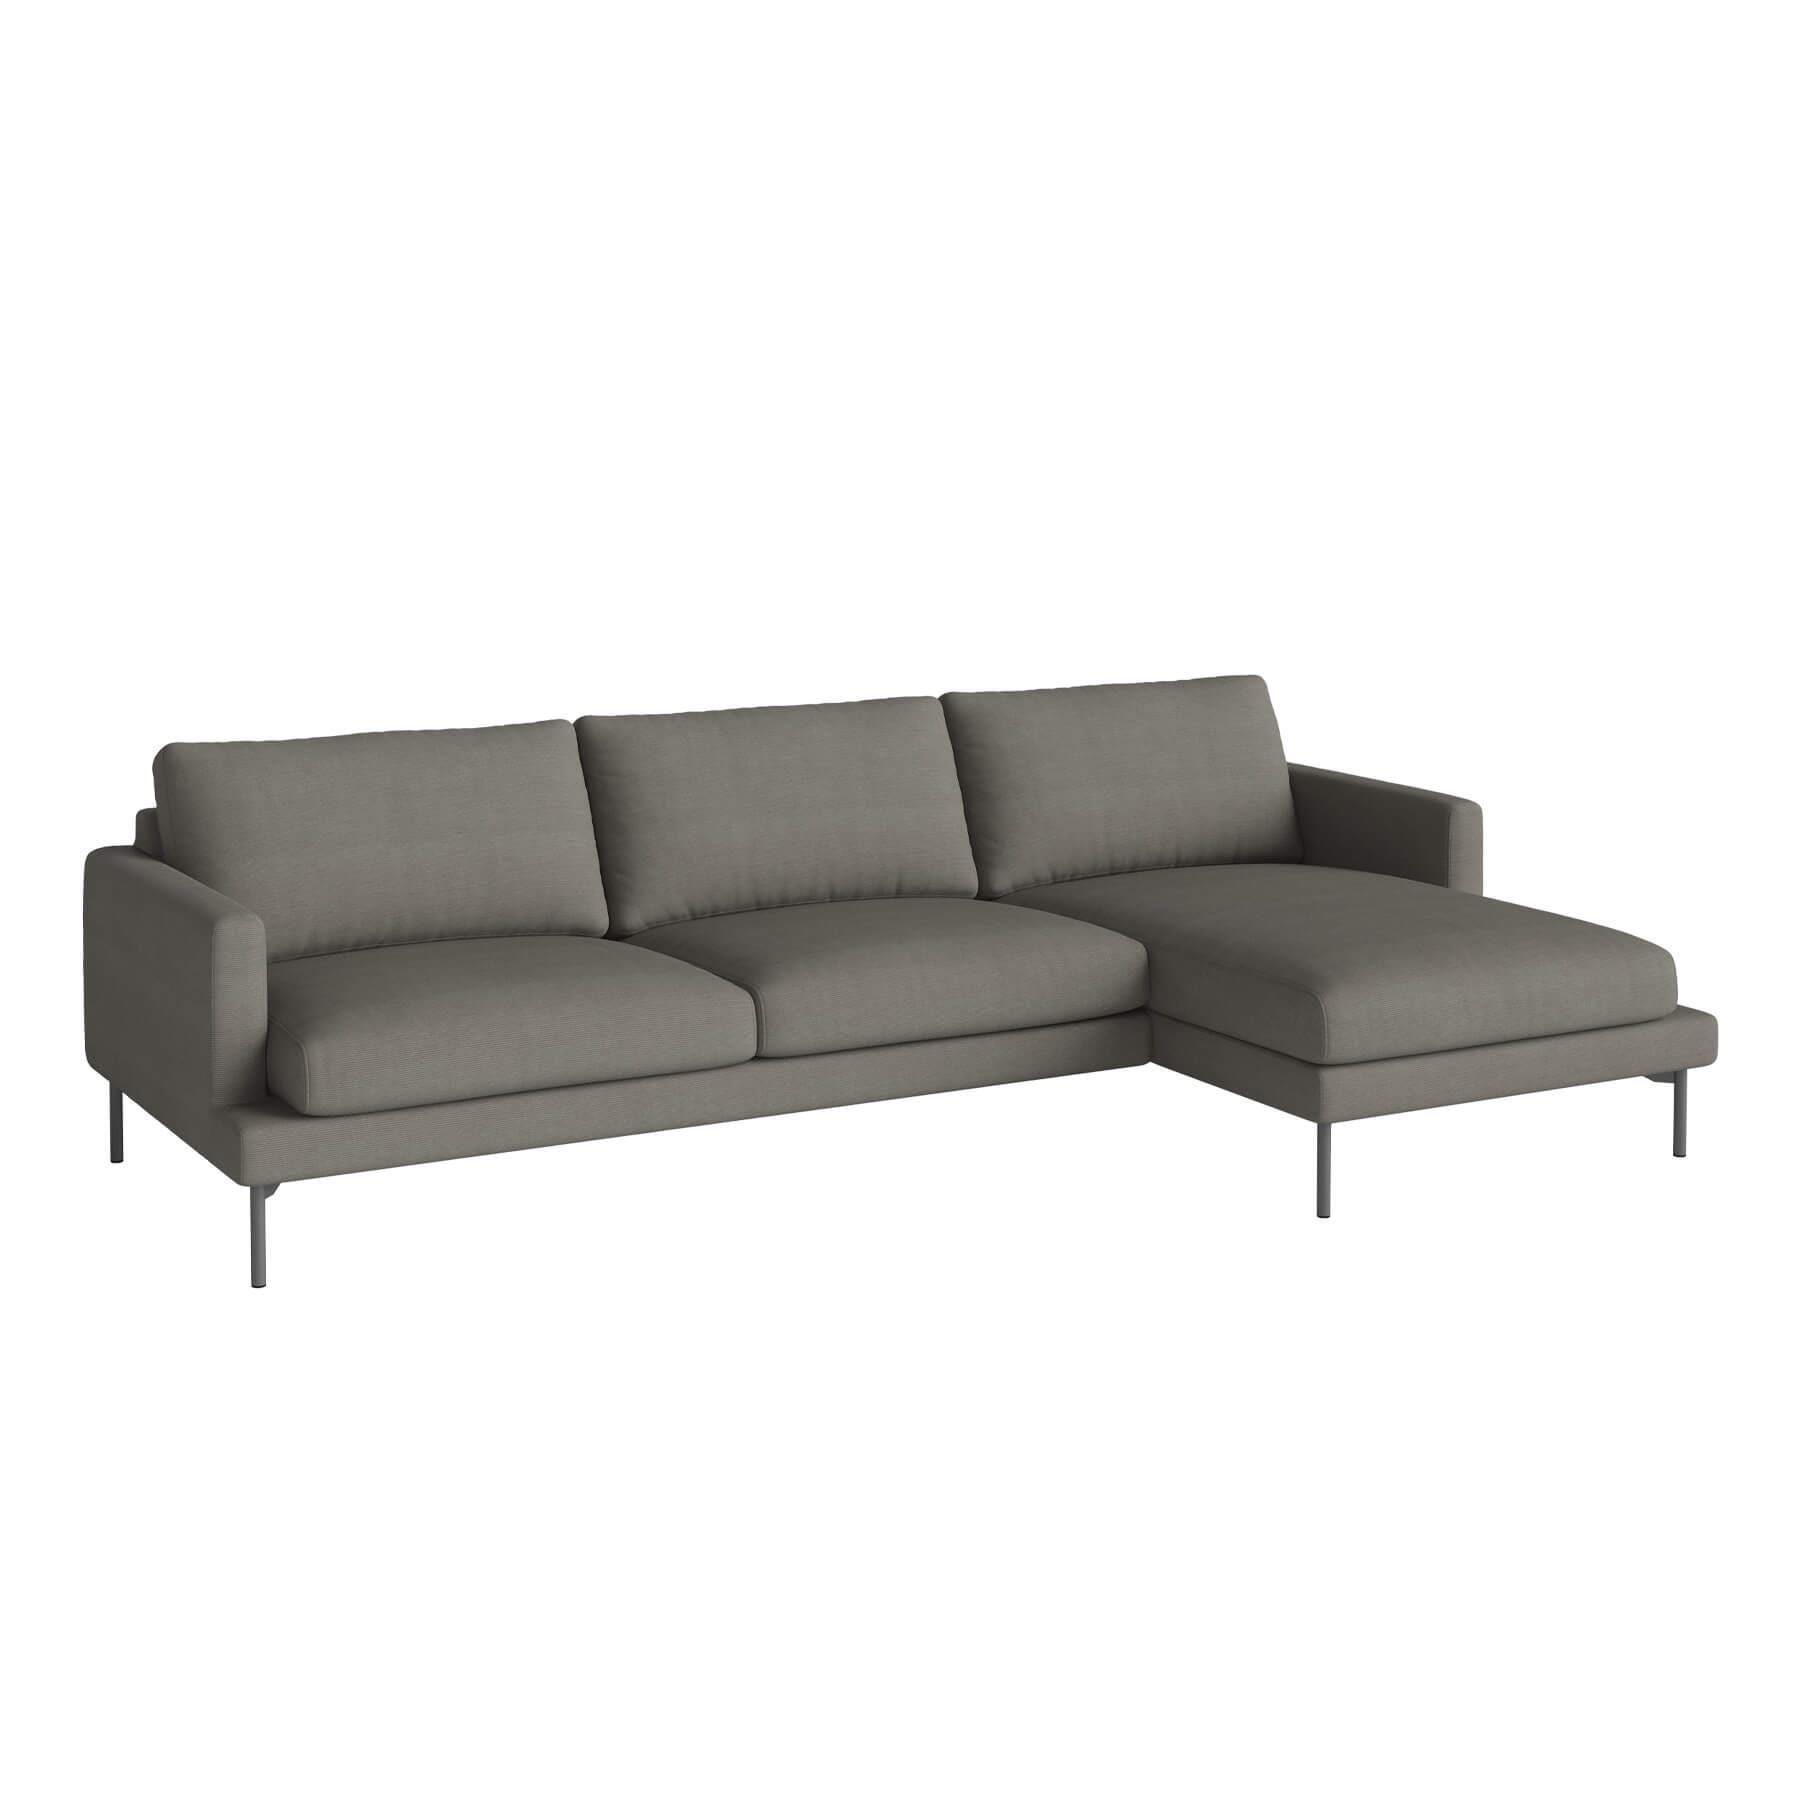 Bolia Veneda Sofa 35 Seater Sofa With Chaise Longue Grey Laquered Steel Linea Grey Brown Right Brown Designer Furniture From Holloways Of Ludlow